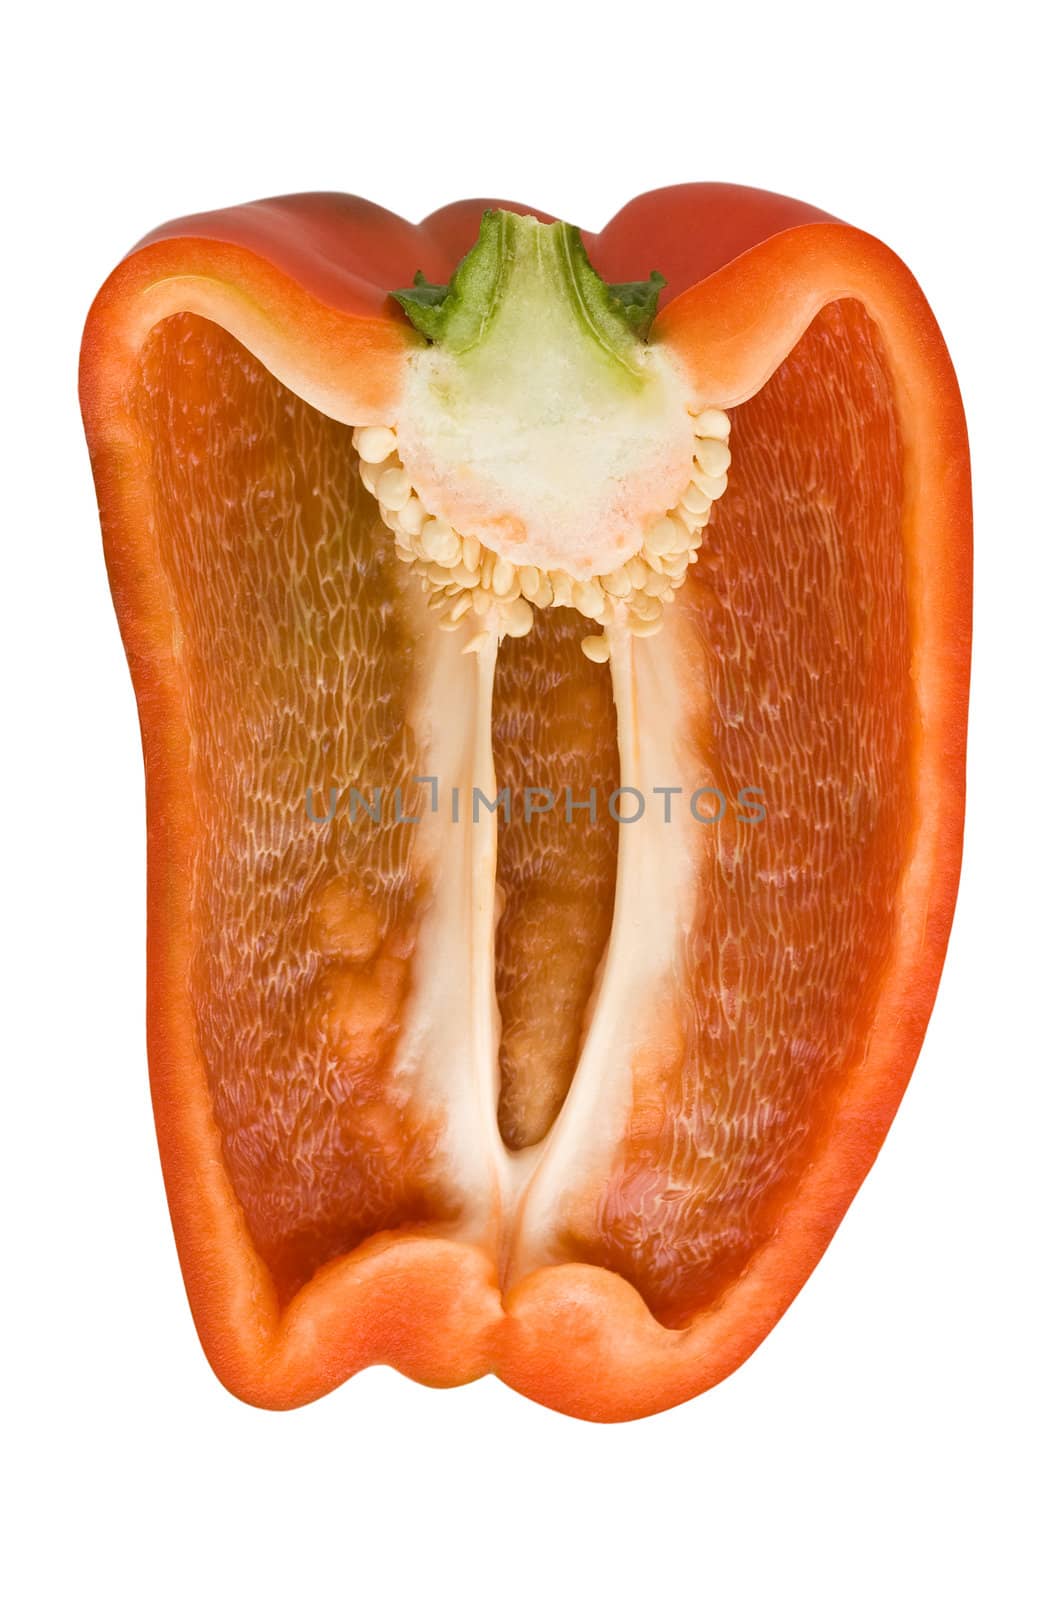 Red bell pepper, cut, white background, clipping path